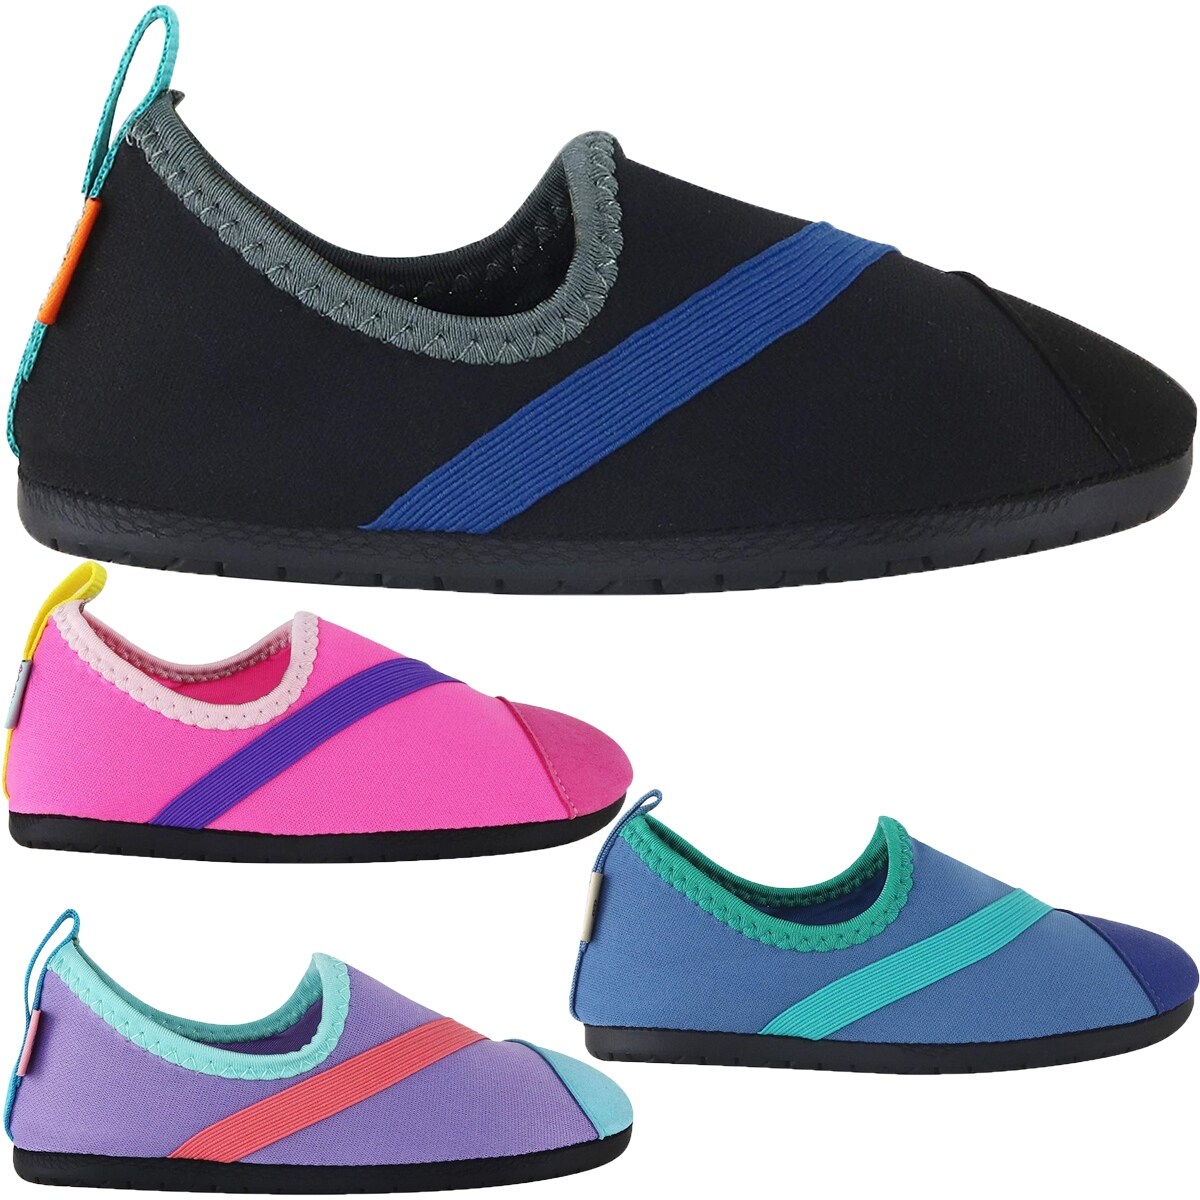 fitkicks active footwear